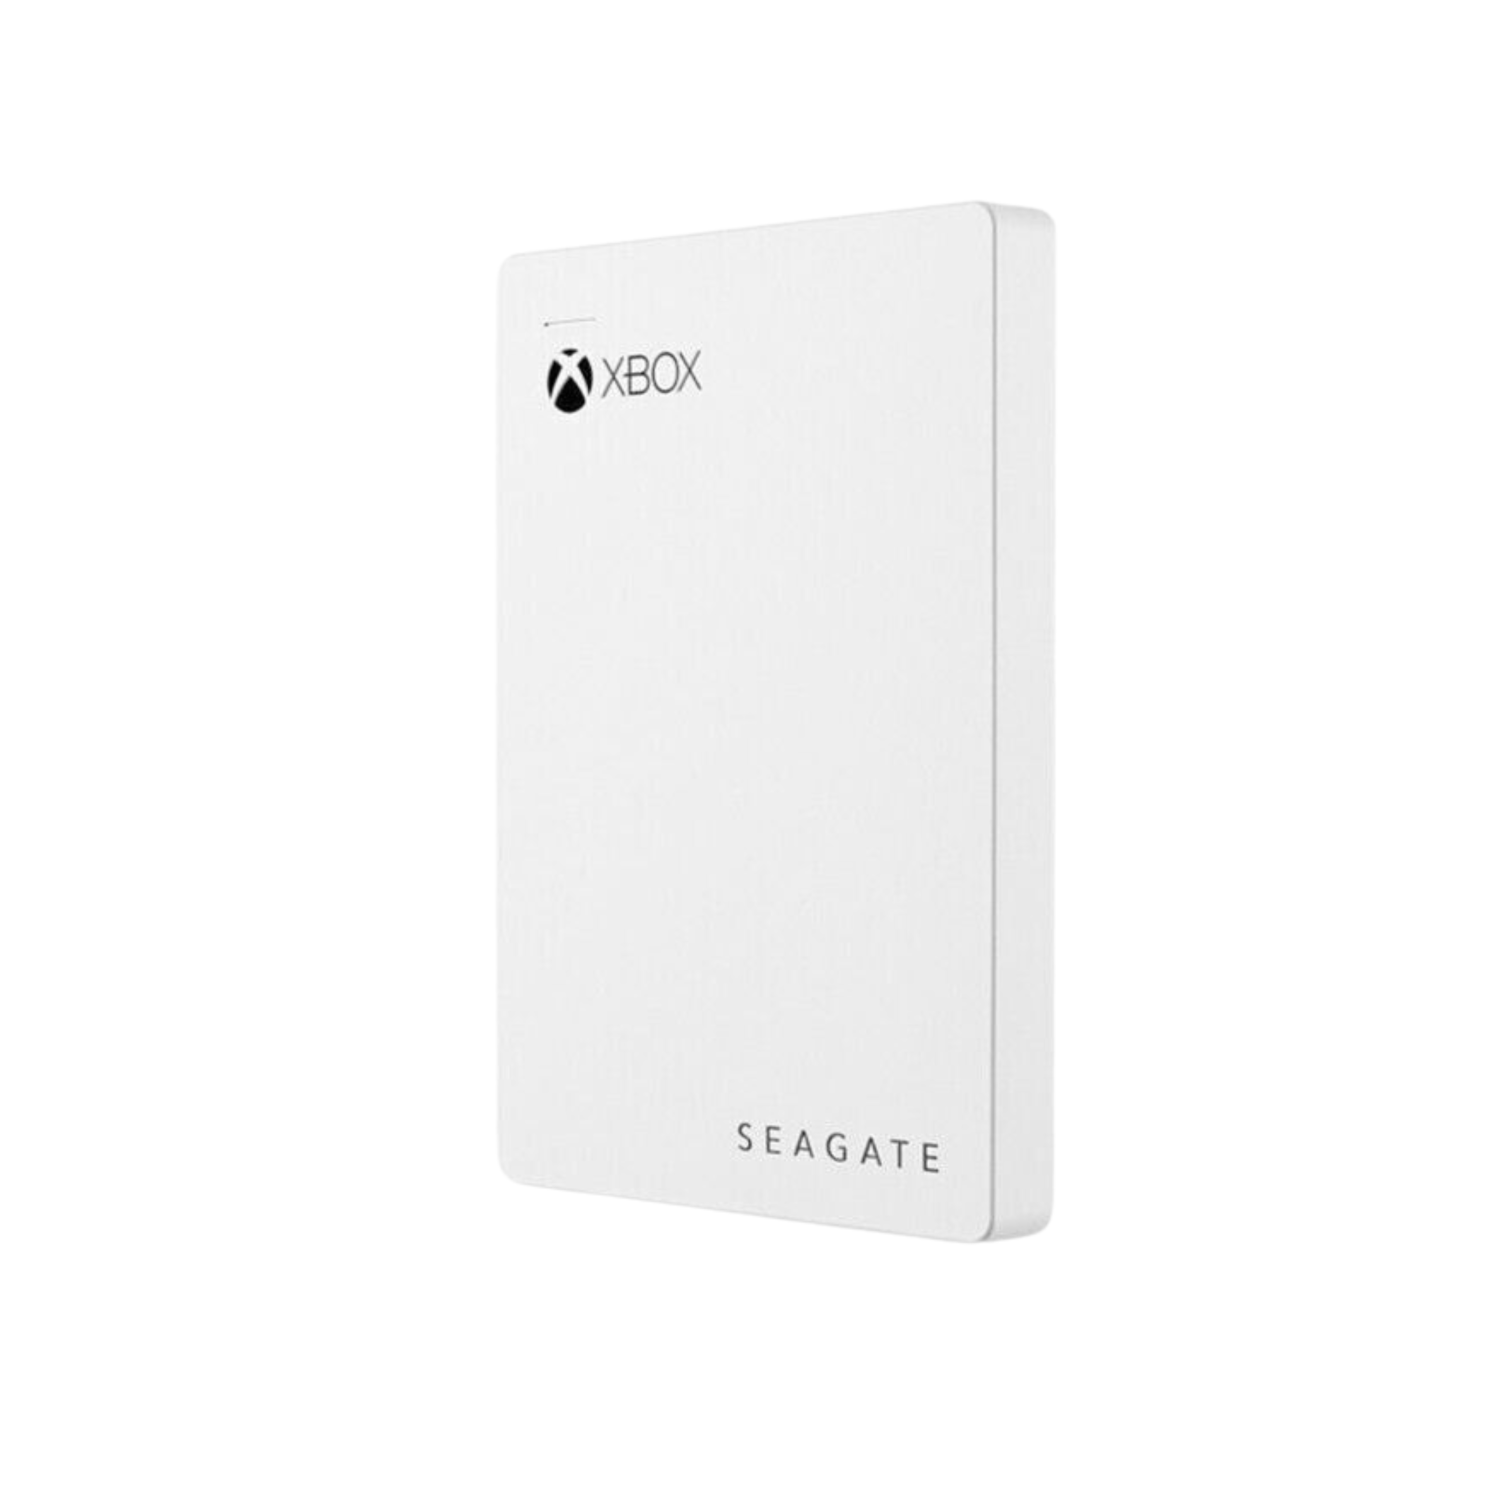 Refurbished (Good) - Seagate Game Drive for Xbox 2TB USB 3.0 Portable External HD STEA2000417, Certified Refurbished